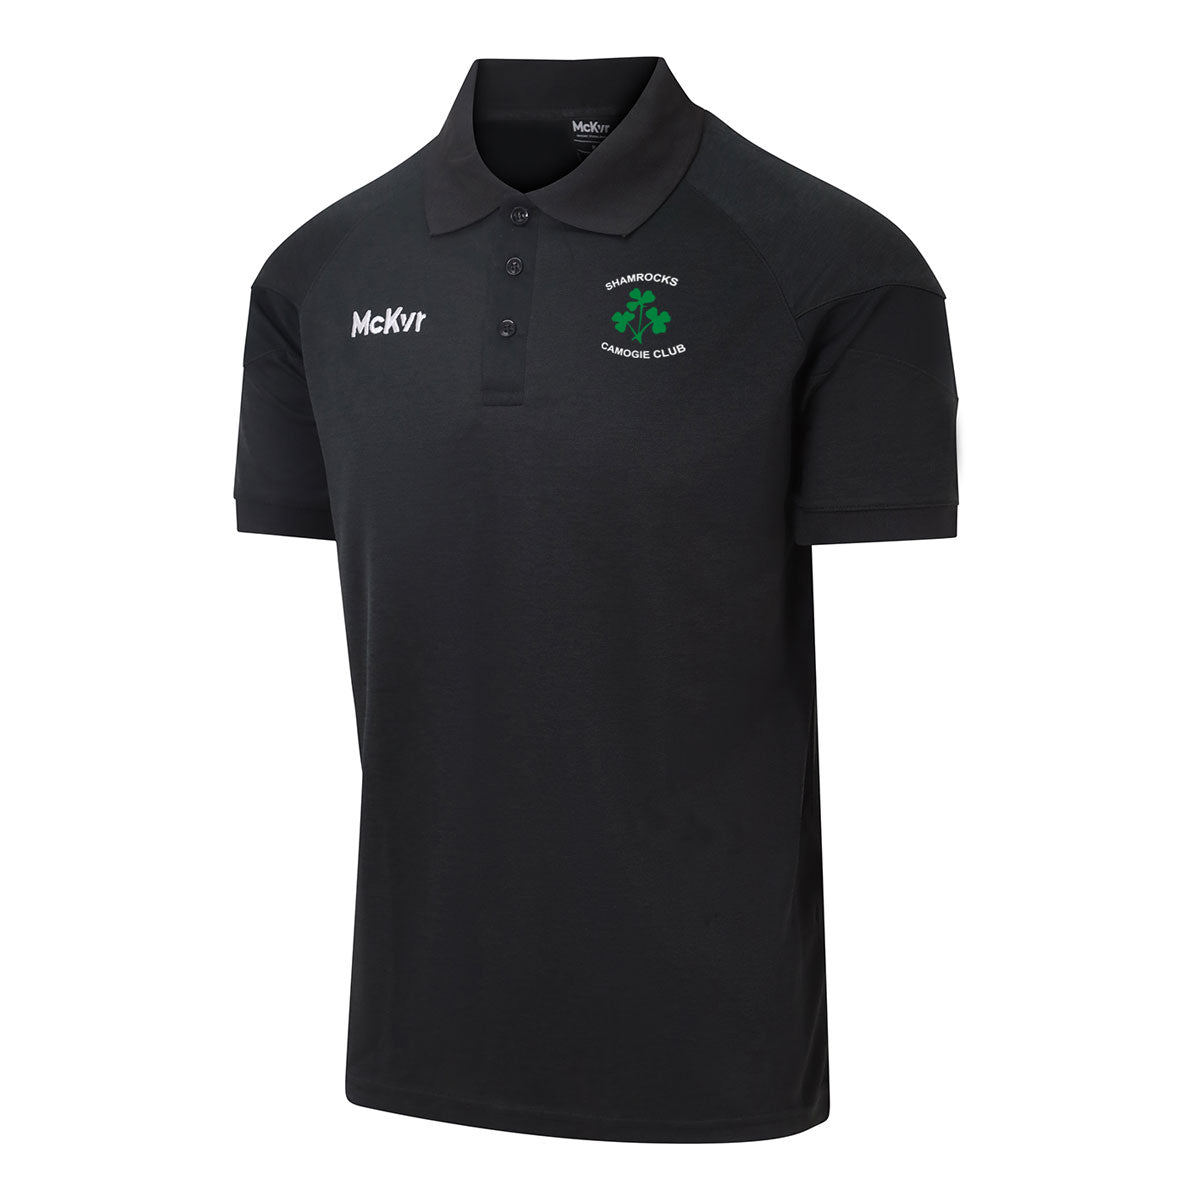 Mc Keever Shamrocks Camogie - Galway Core 22 Polo Top - Adult - Black